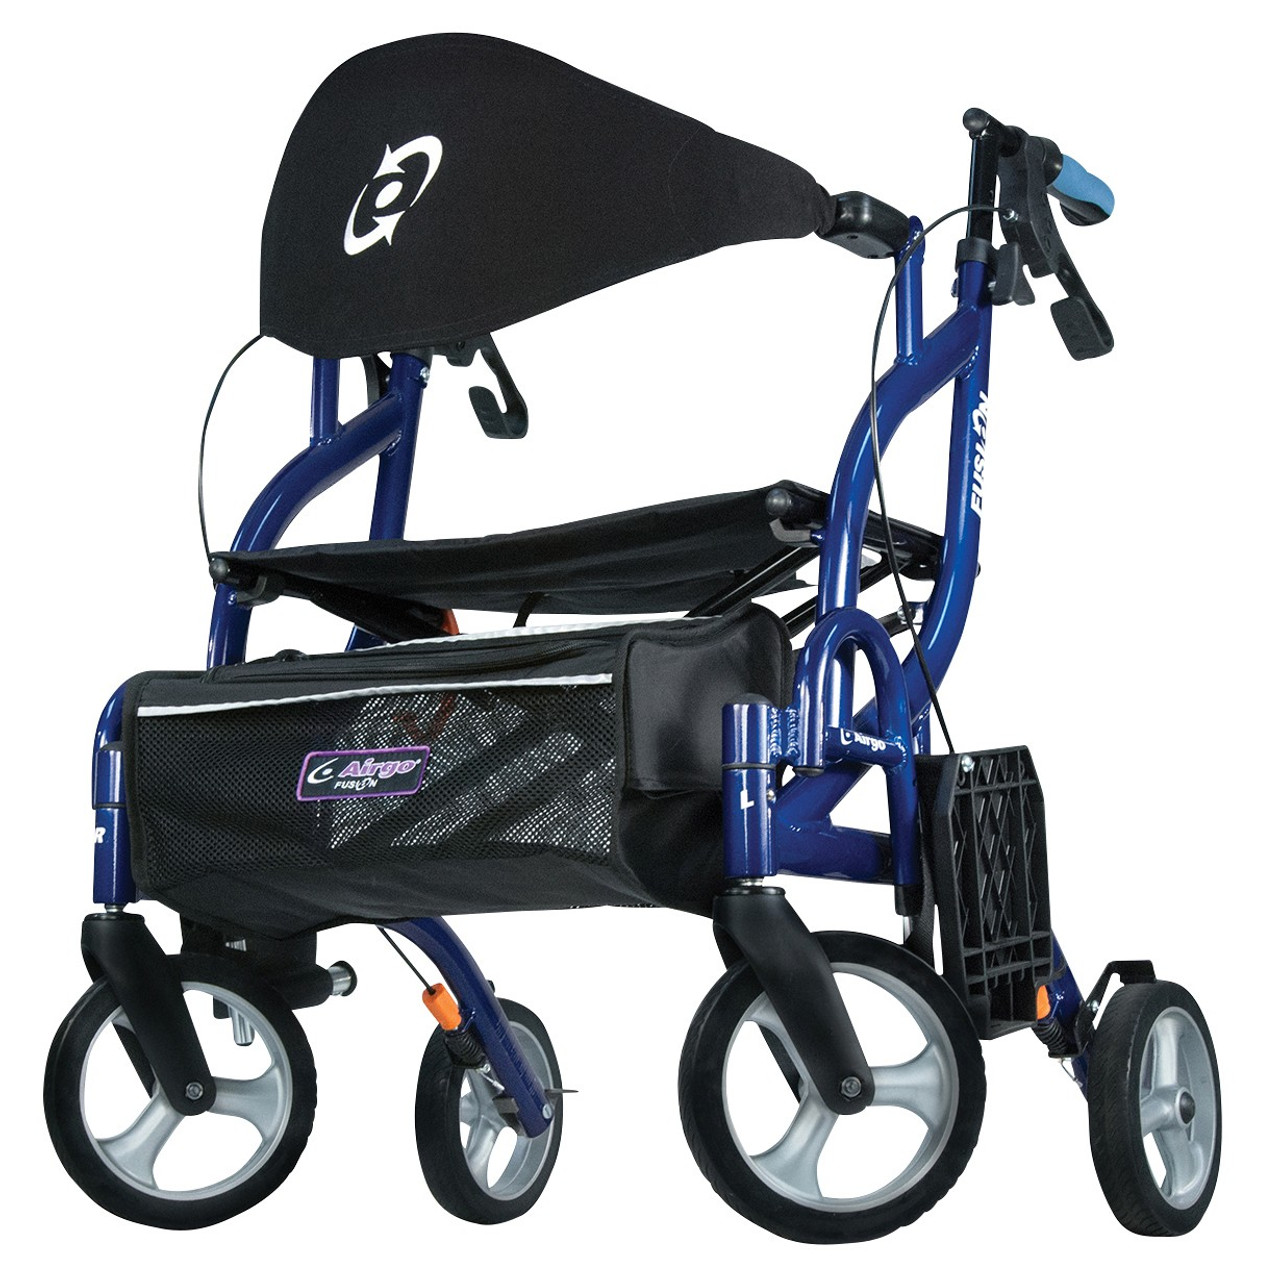 Airgo 700-935 Fusion Side-Folding Rollator & Transport Chair - Pacific Blue